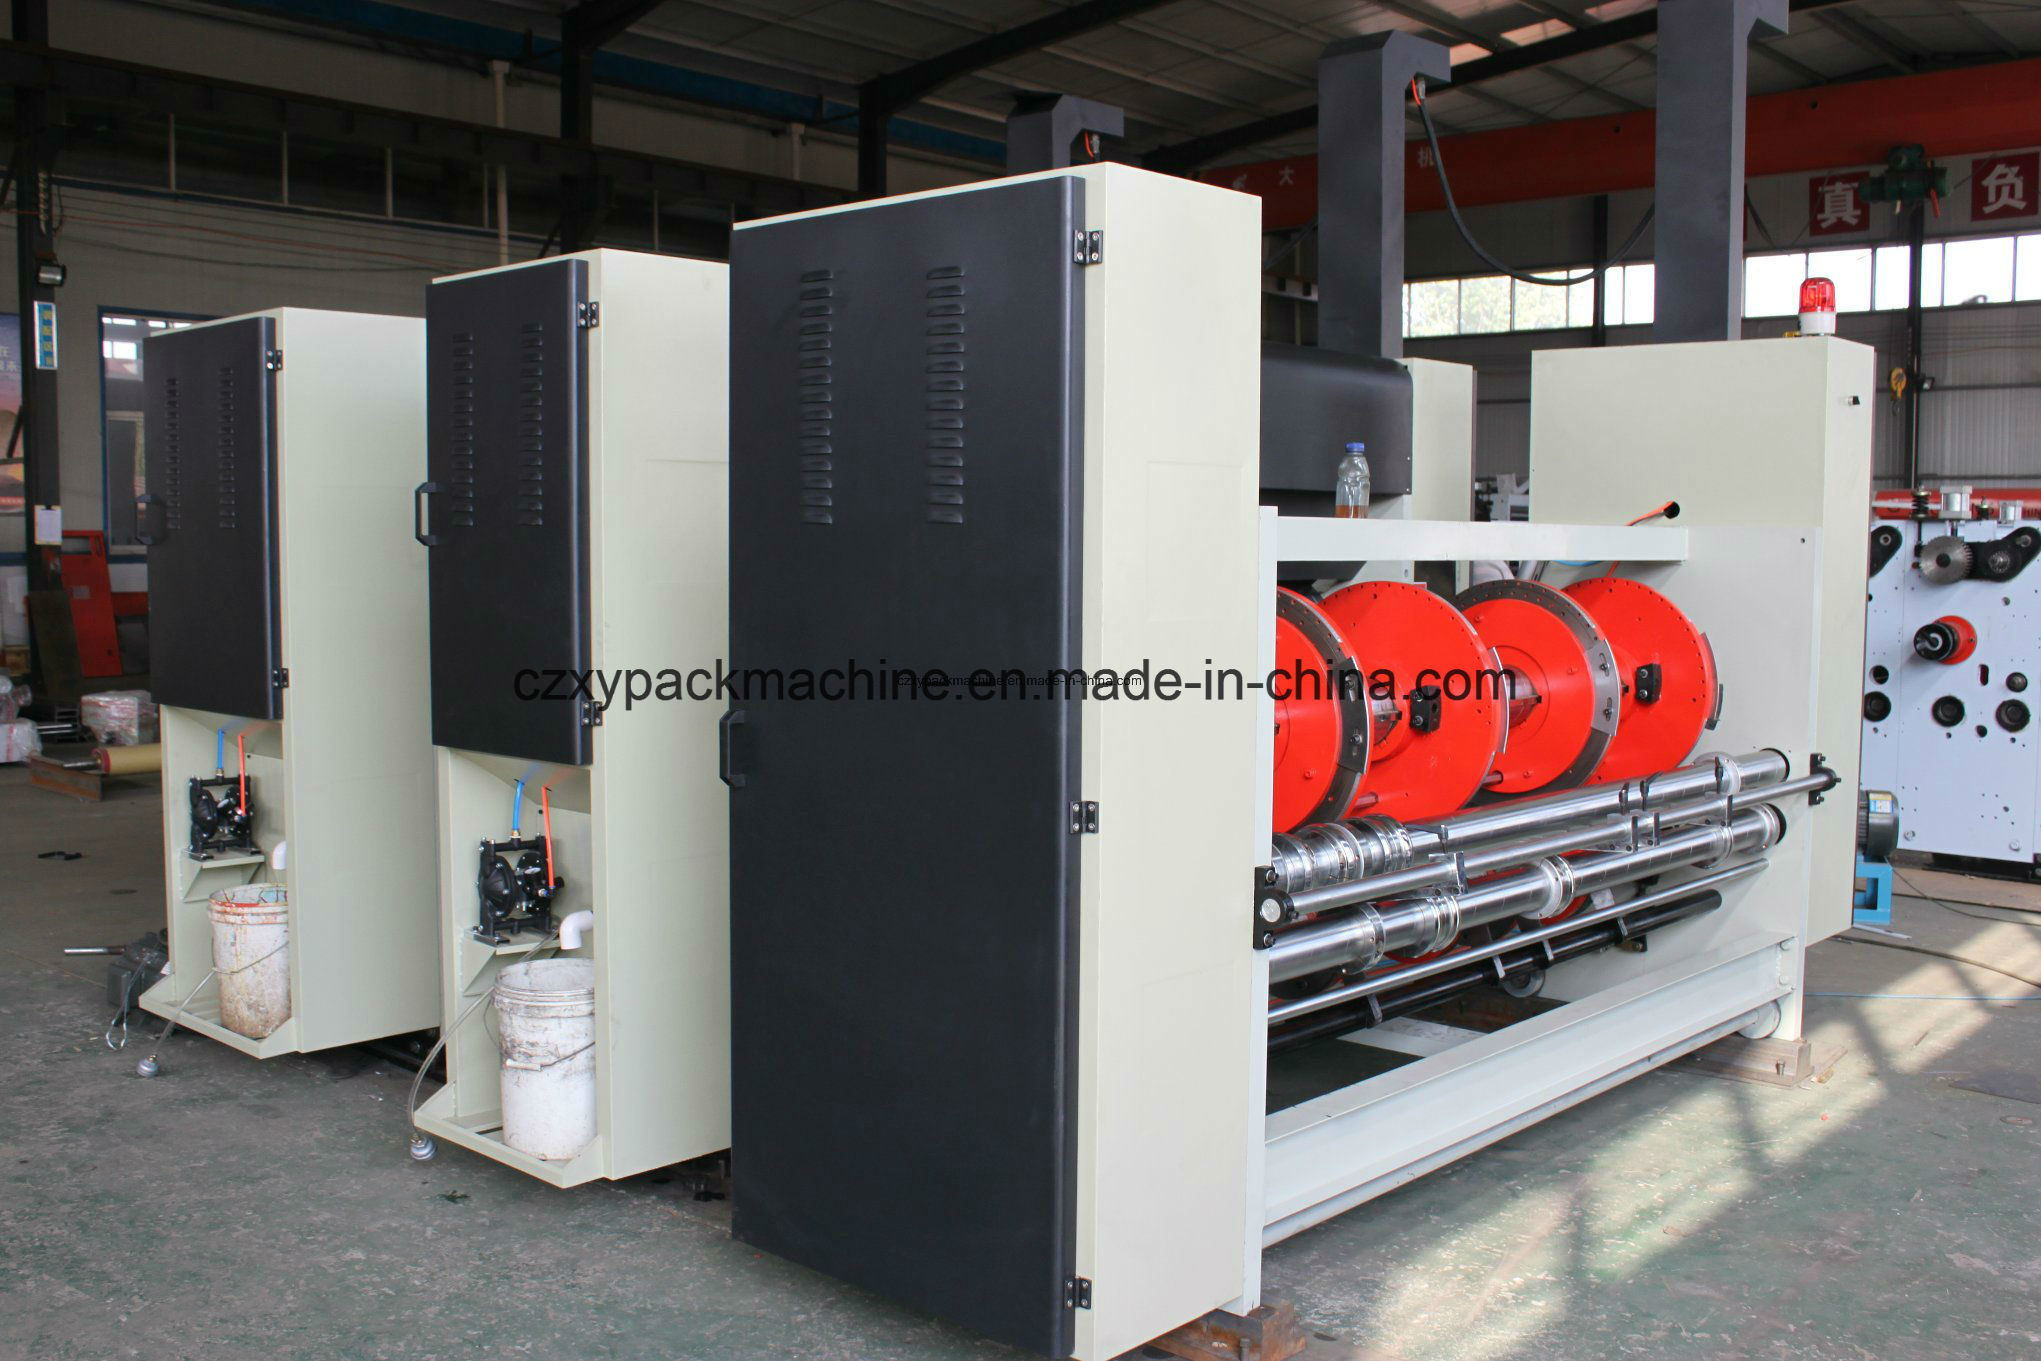 High Speed Corrugated Carton Printing Machine with Slotting and Die Cutting